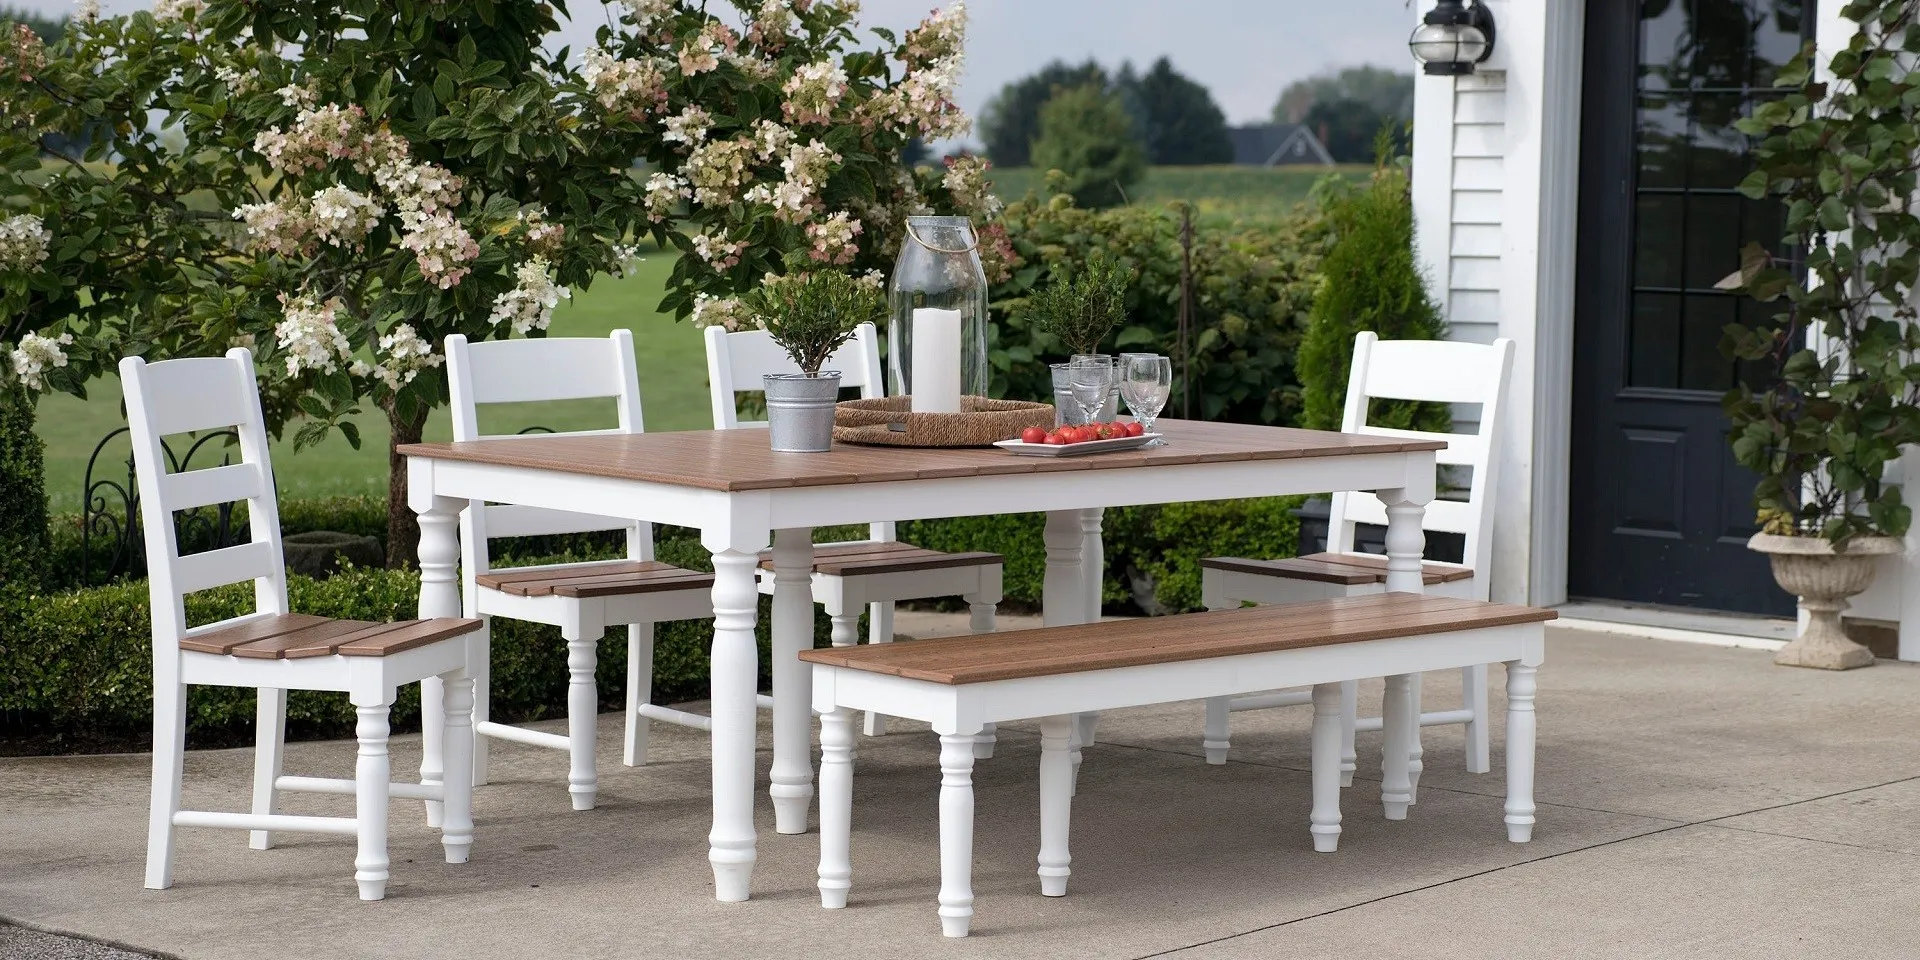 HDPE dining table